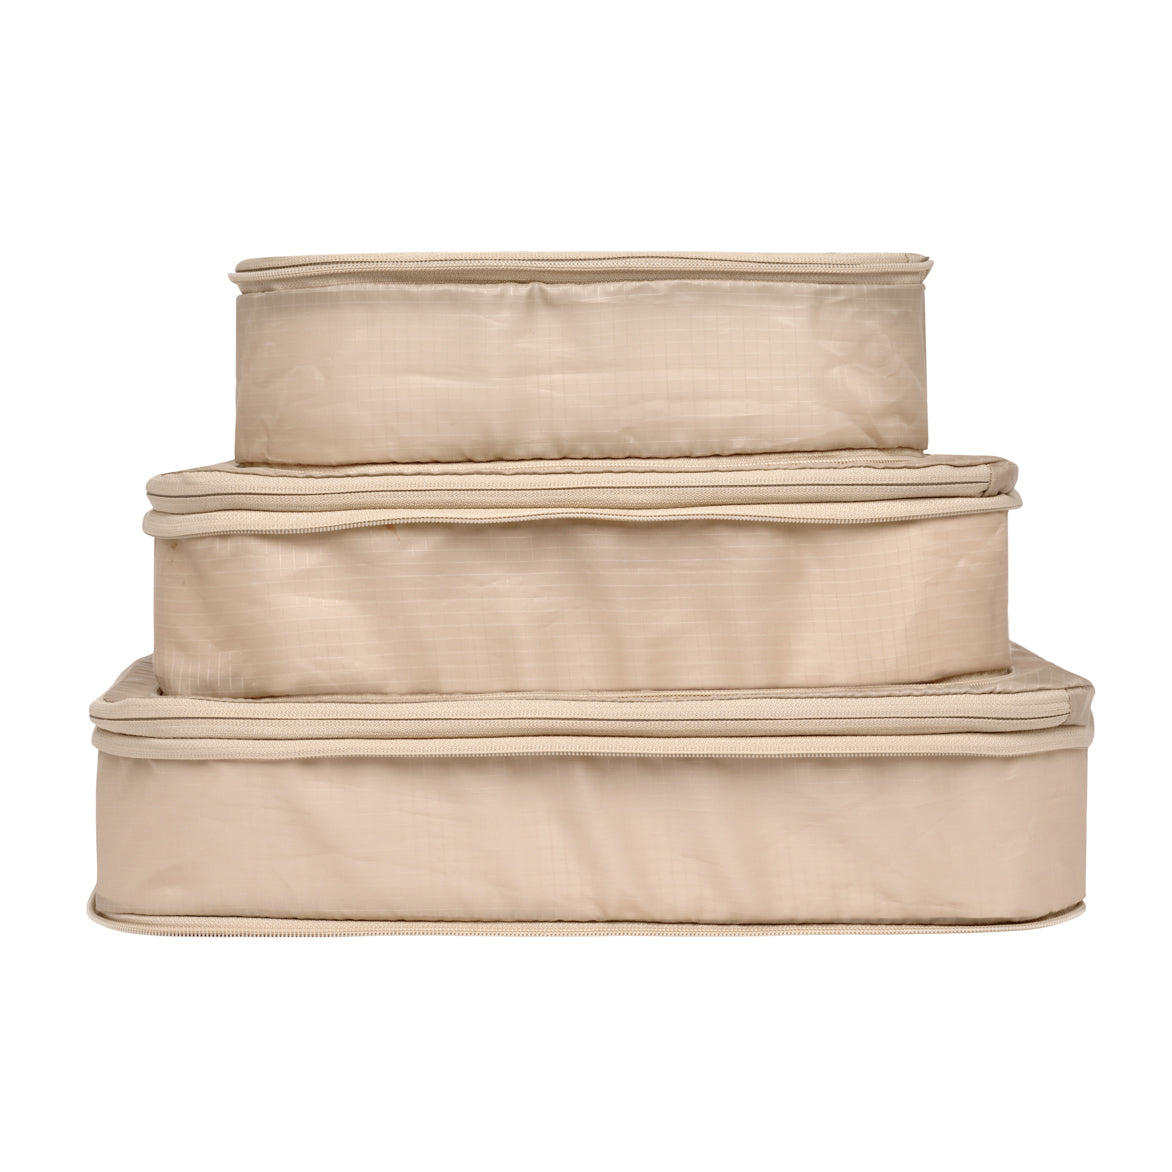 Re-cycled and Reinforced Nylon Compression Packing Cubes, 3-pack Taupe